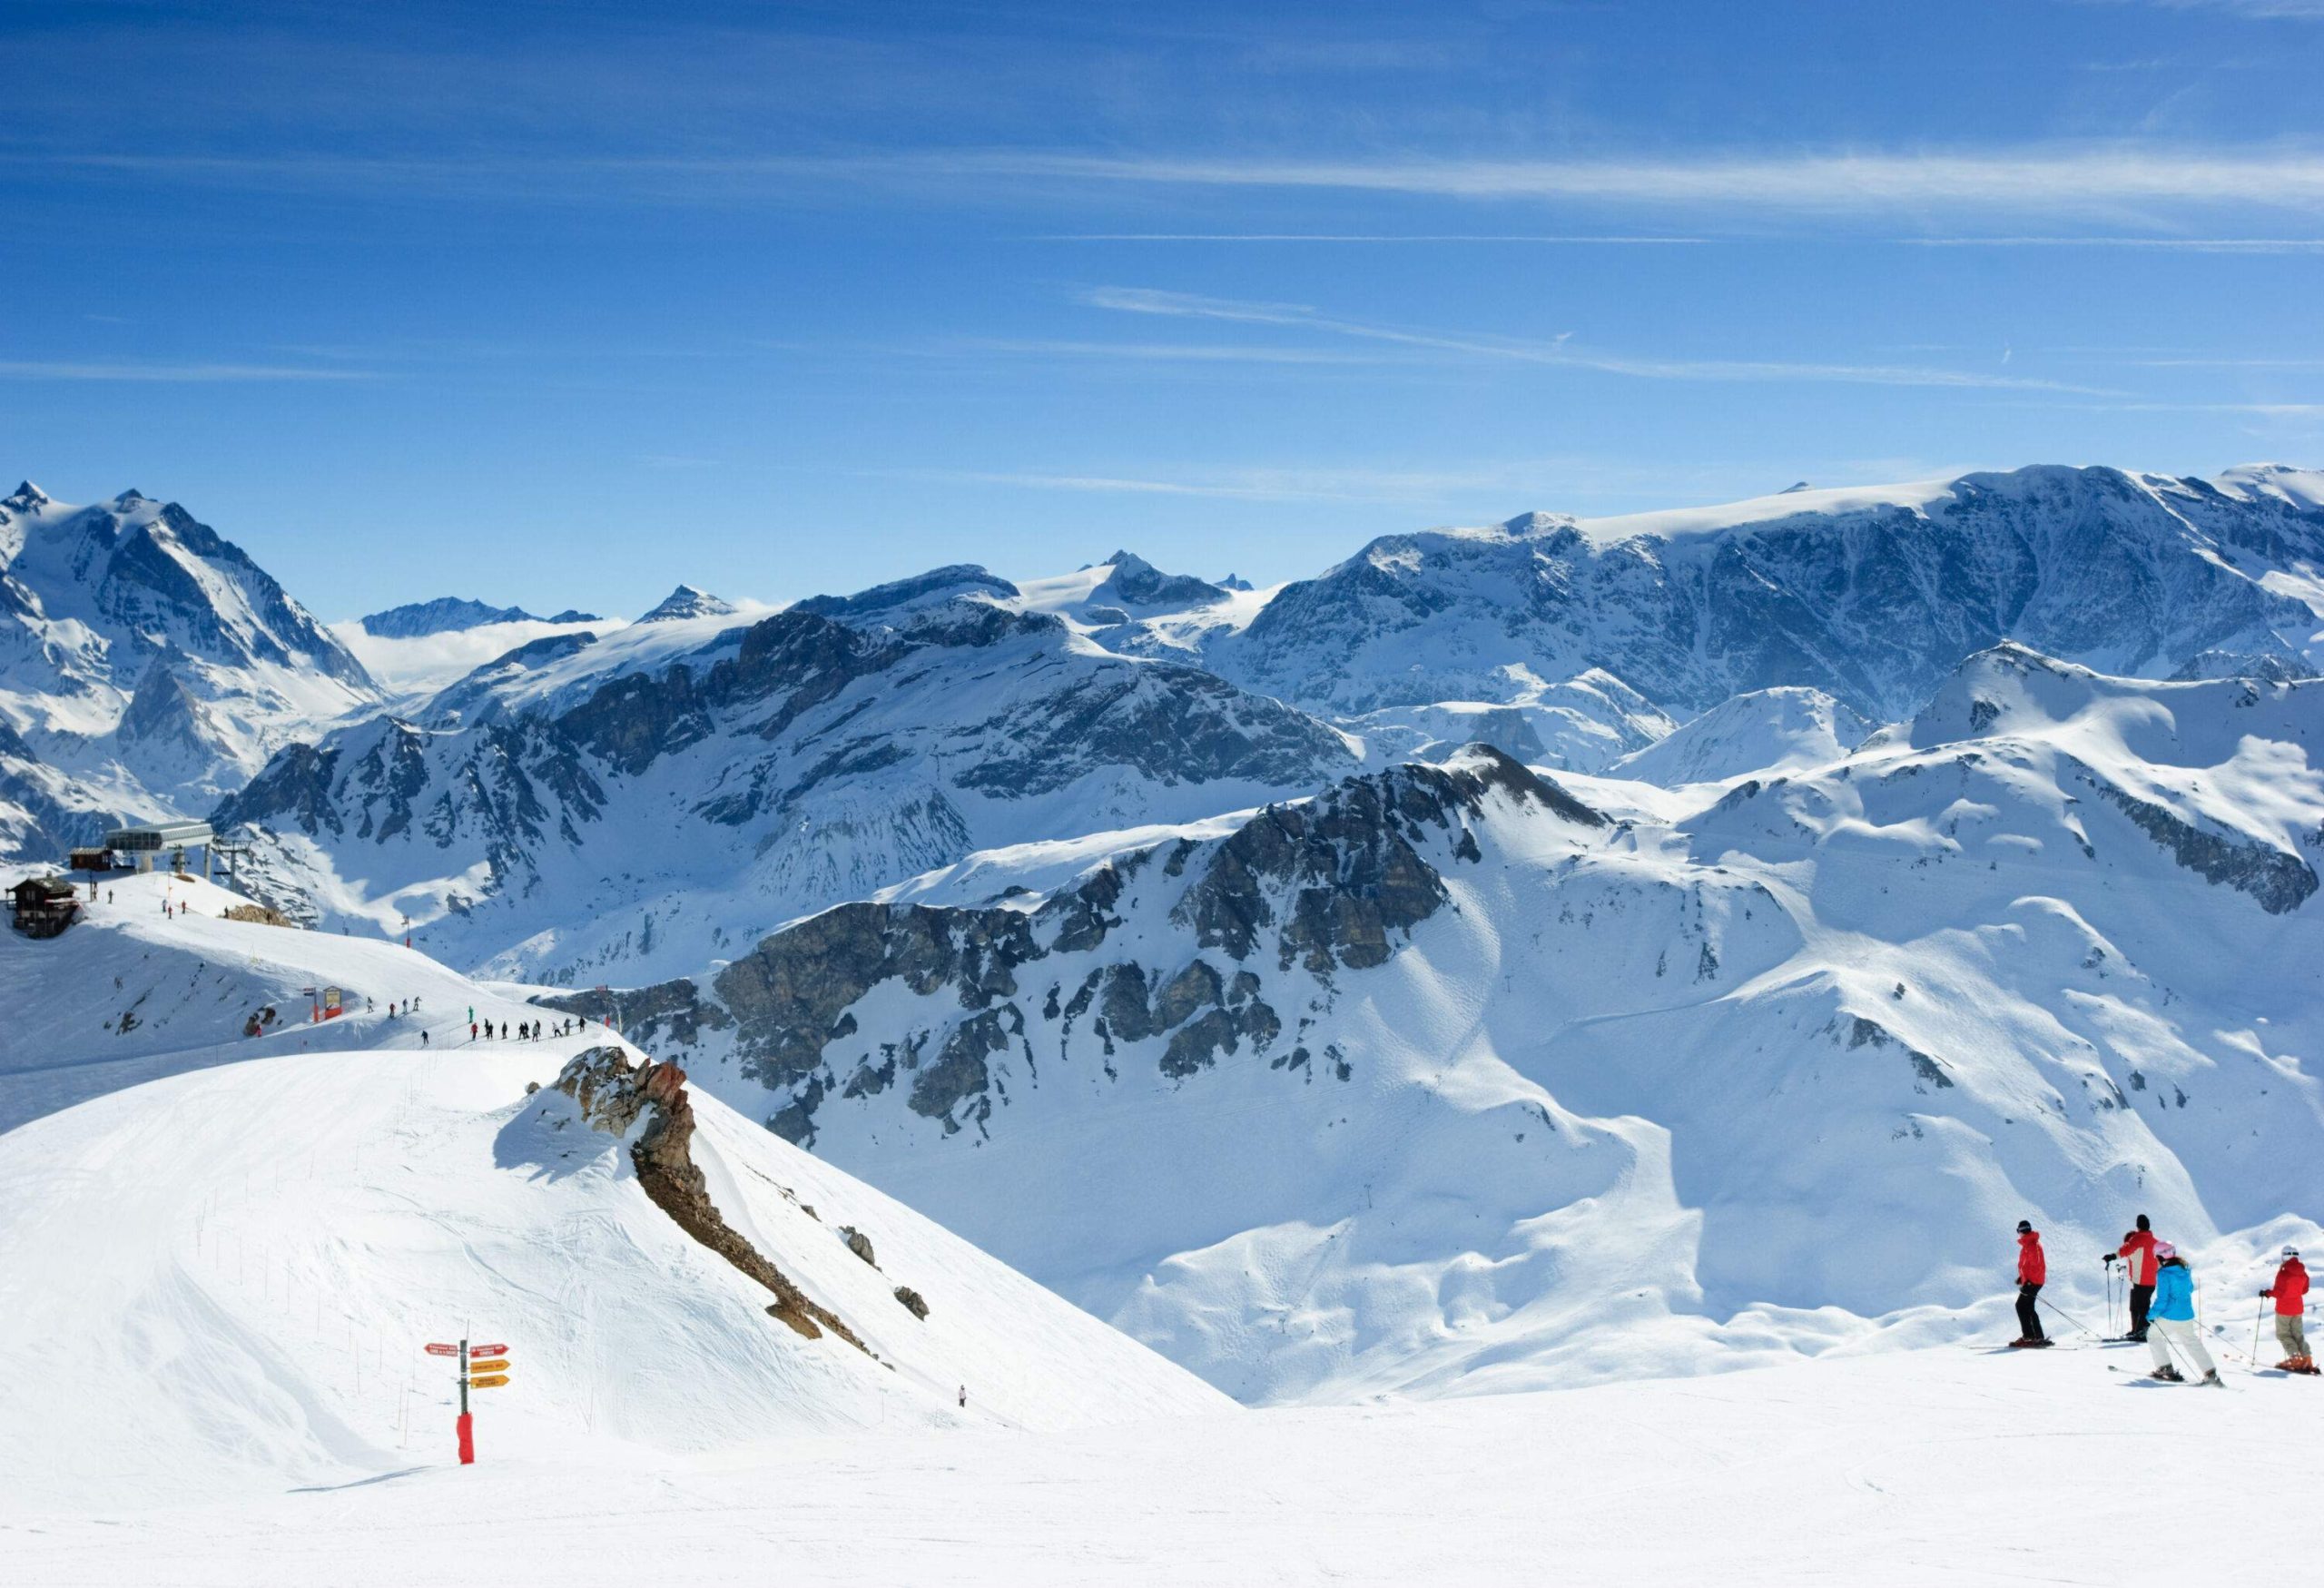 A mountain range blanketed with snow and populated with skiers.